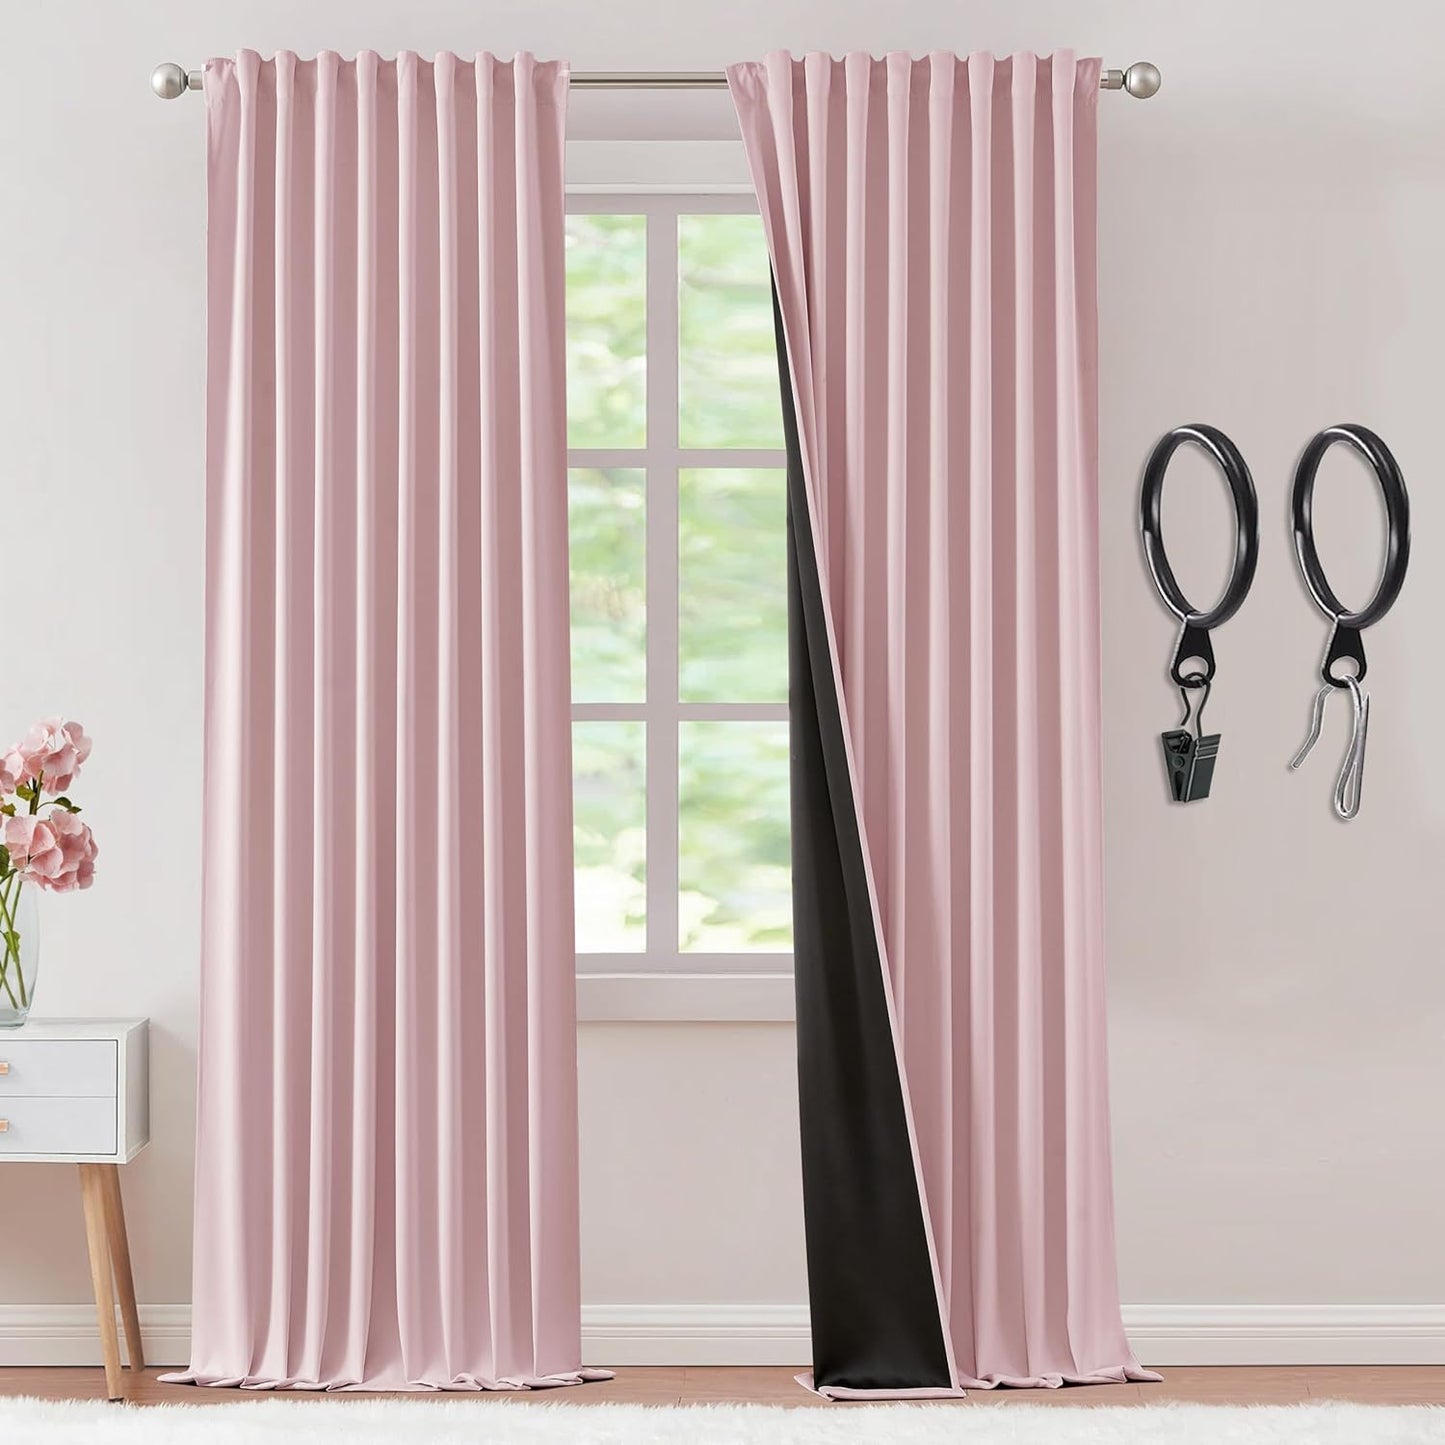 SHINELAND Beige Room Darkening Curtains 105 Inches Long for Living Room Bedroom,Cortinas Para Cuarto Bloqueador De Luz,Thermal Insulated Back Tab Pleat Blackout Curtains for Sunroom Patio Door Indoor  SHINELAND Pink 2X(52"Wx96"L) 